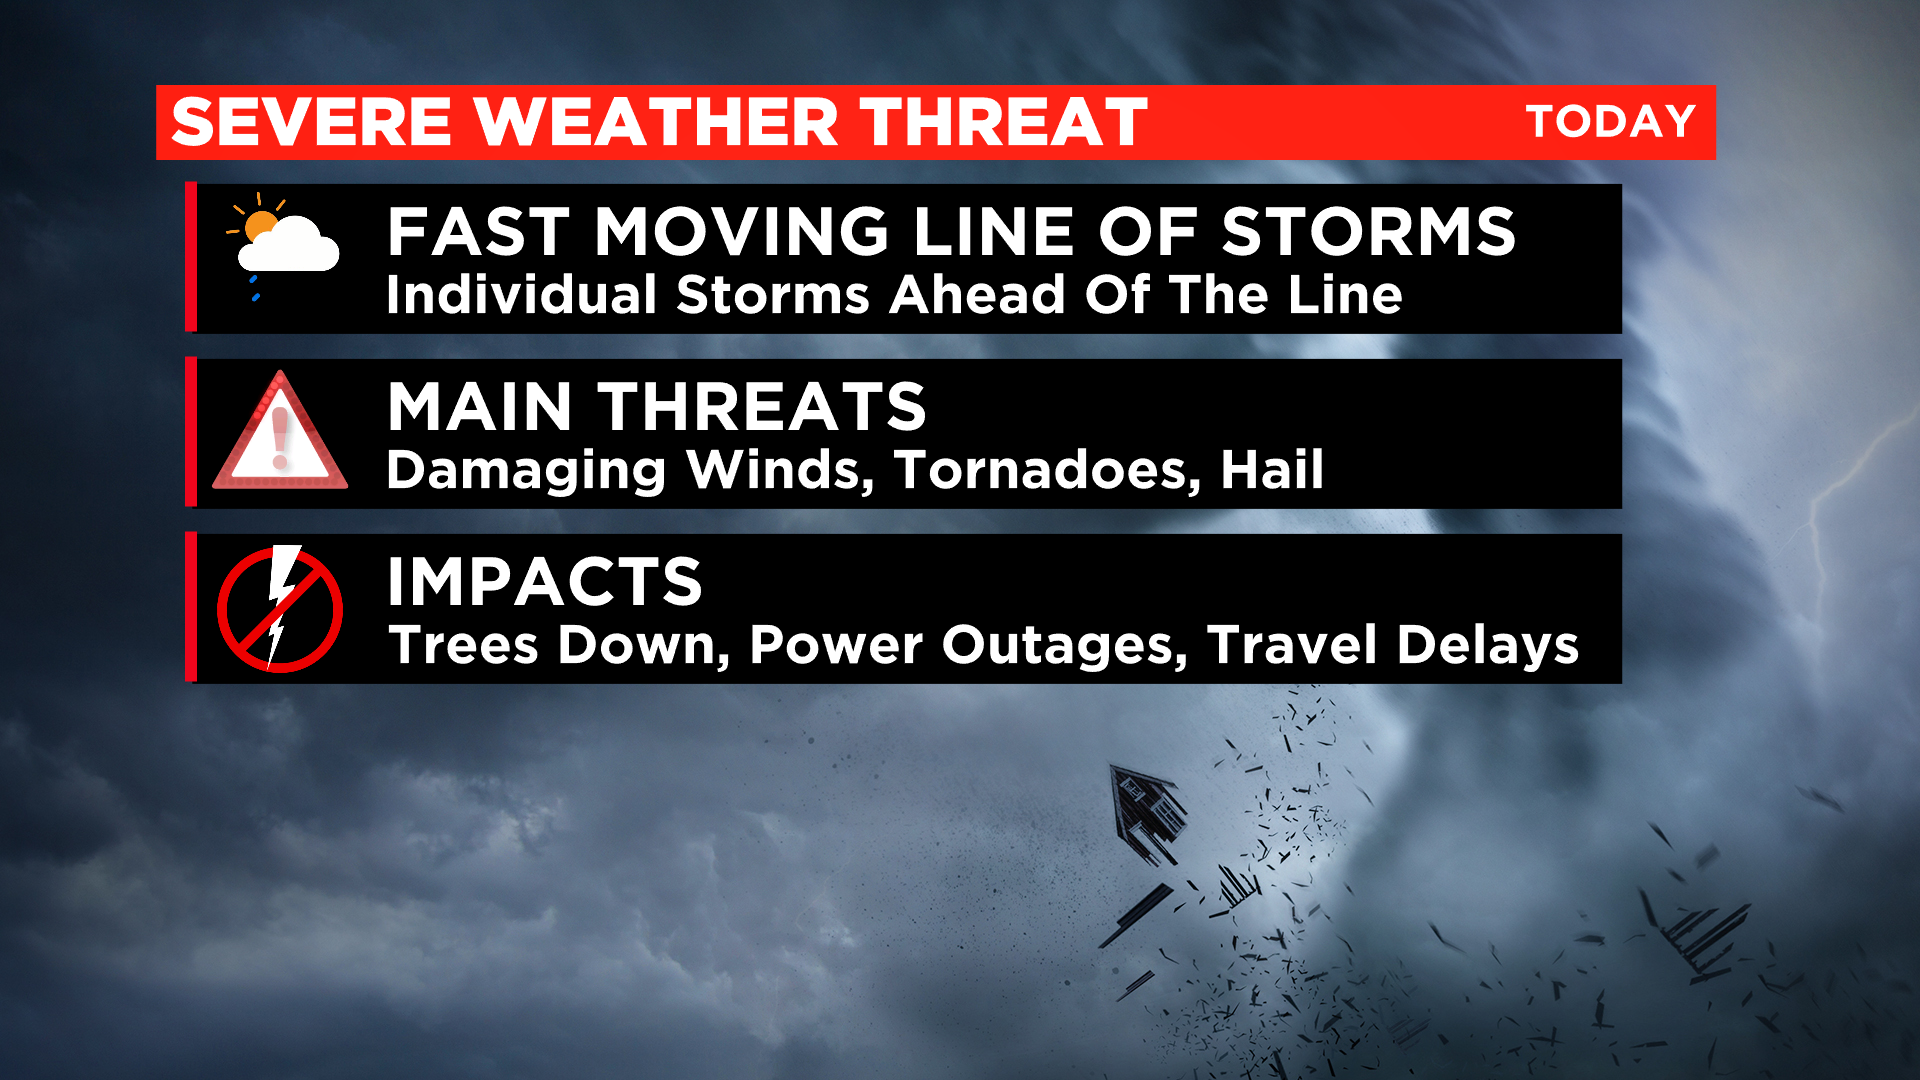 Severe Storms Expected To Bring Damaging Winds, Flooding And Isolated Tornadoes – CBS Philly